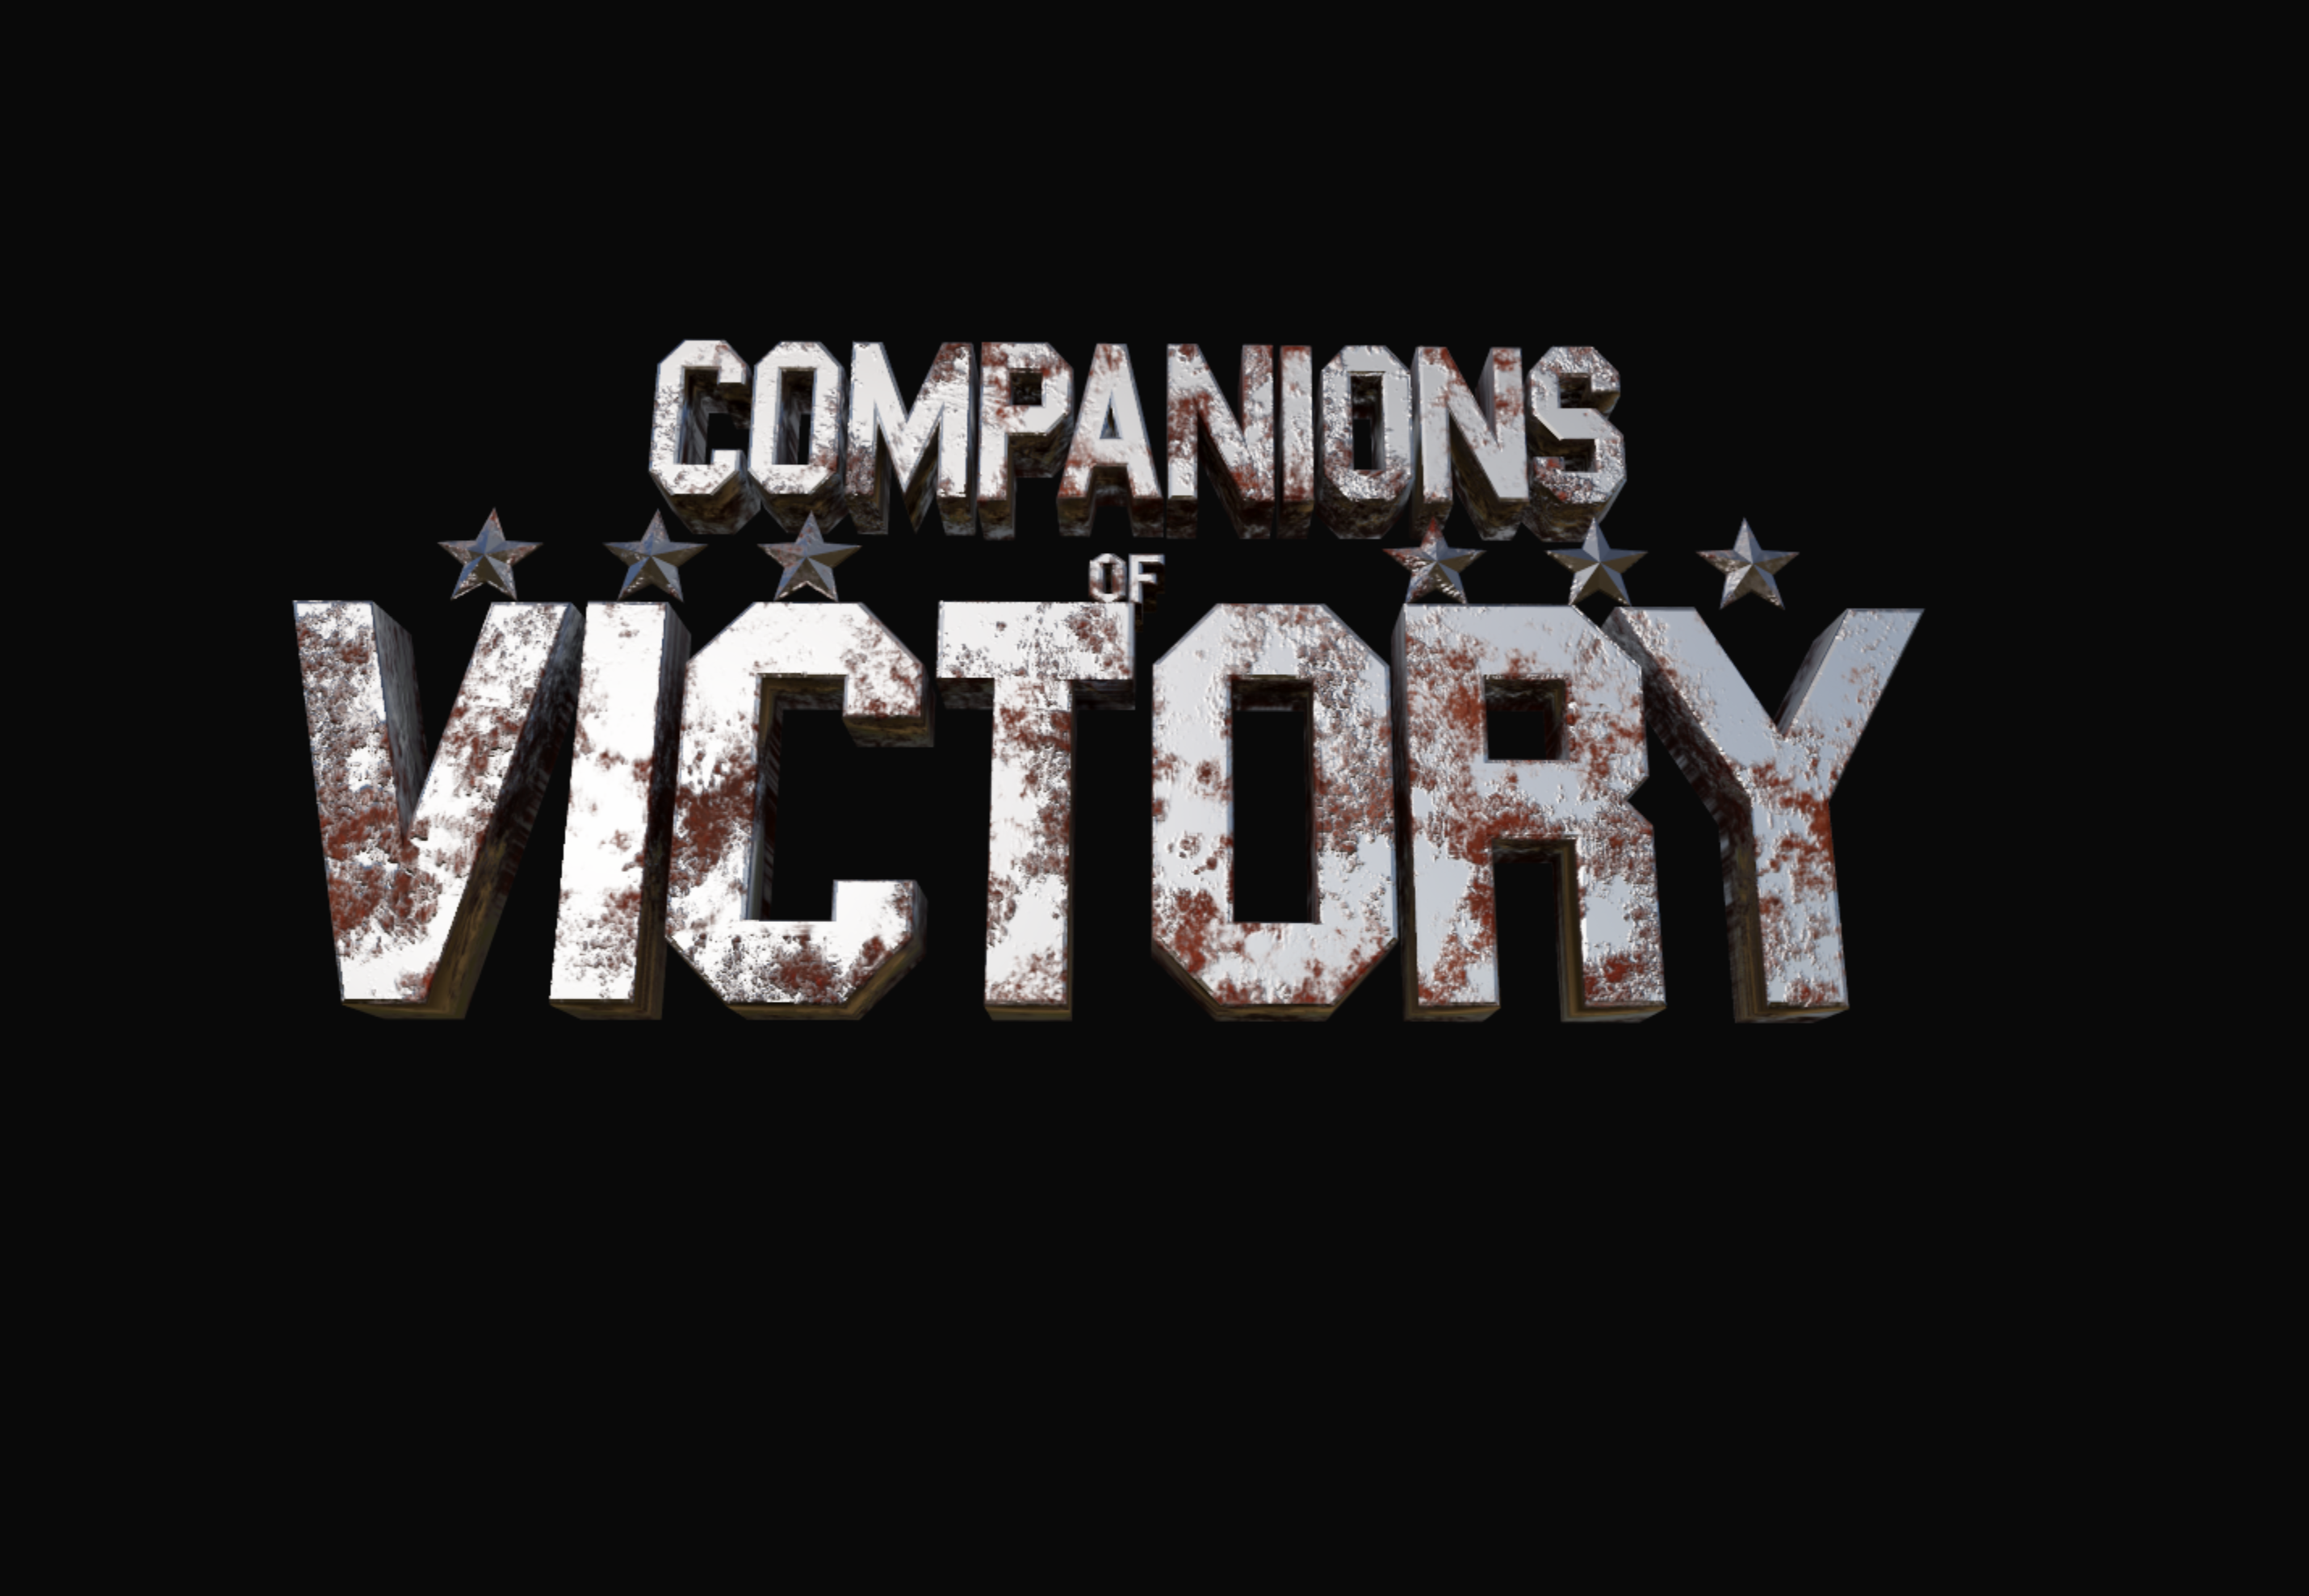 Companions of Victory!